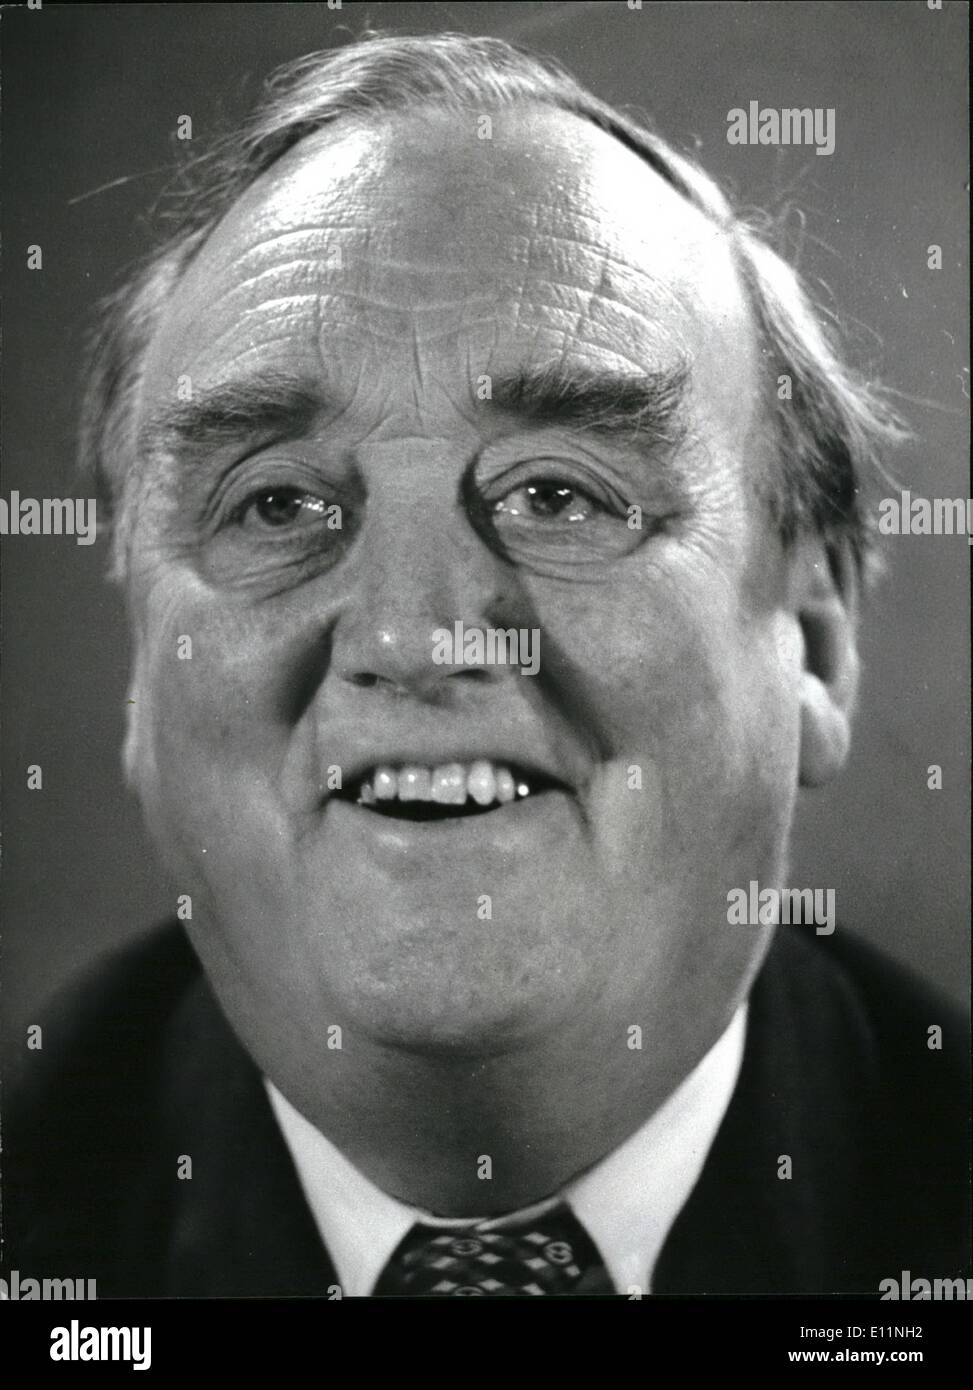 Apr. 04, 1979 - Conservative Party Press Conference: Photo Shows Mr. Willie Whitelaw Deputy leader of the Tory party. Stock Photo